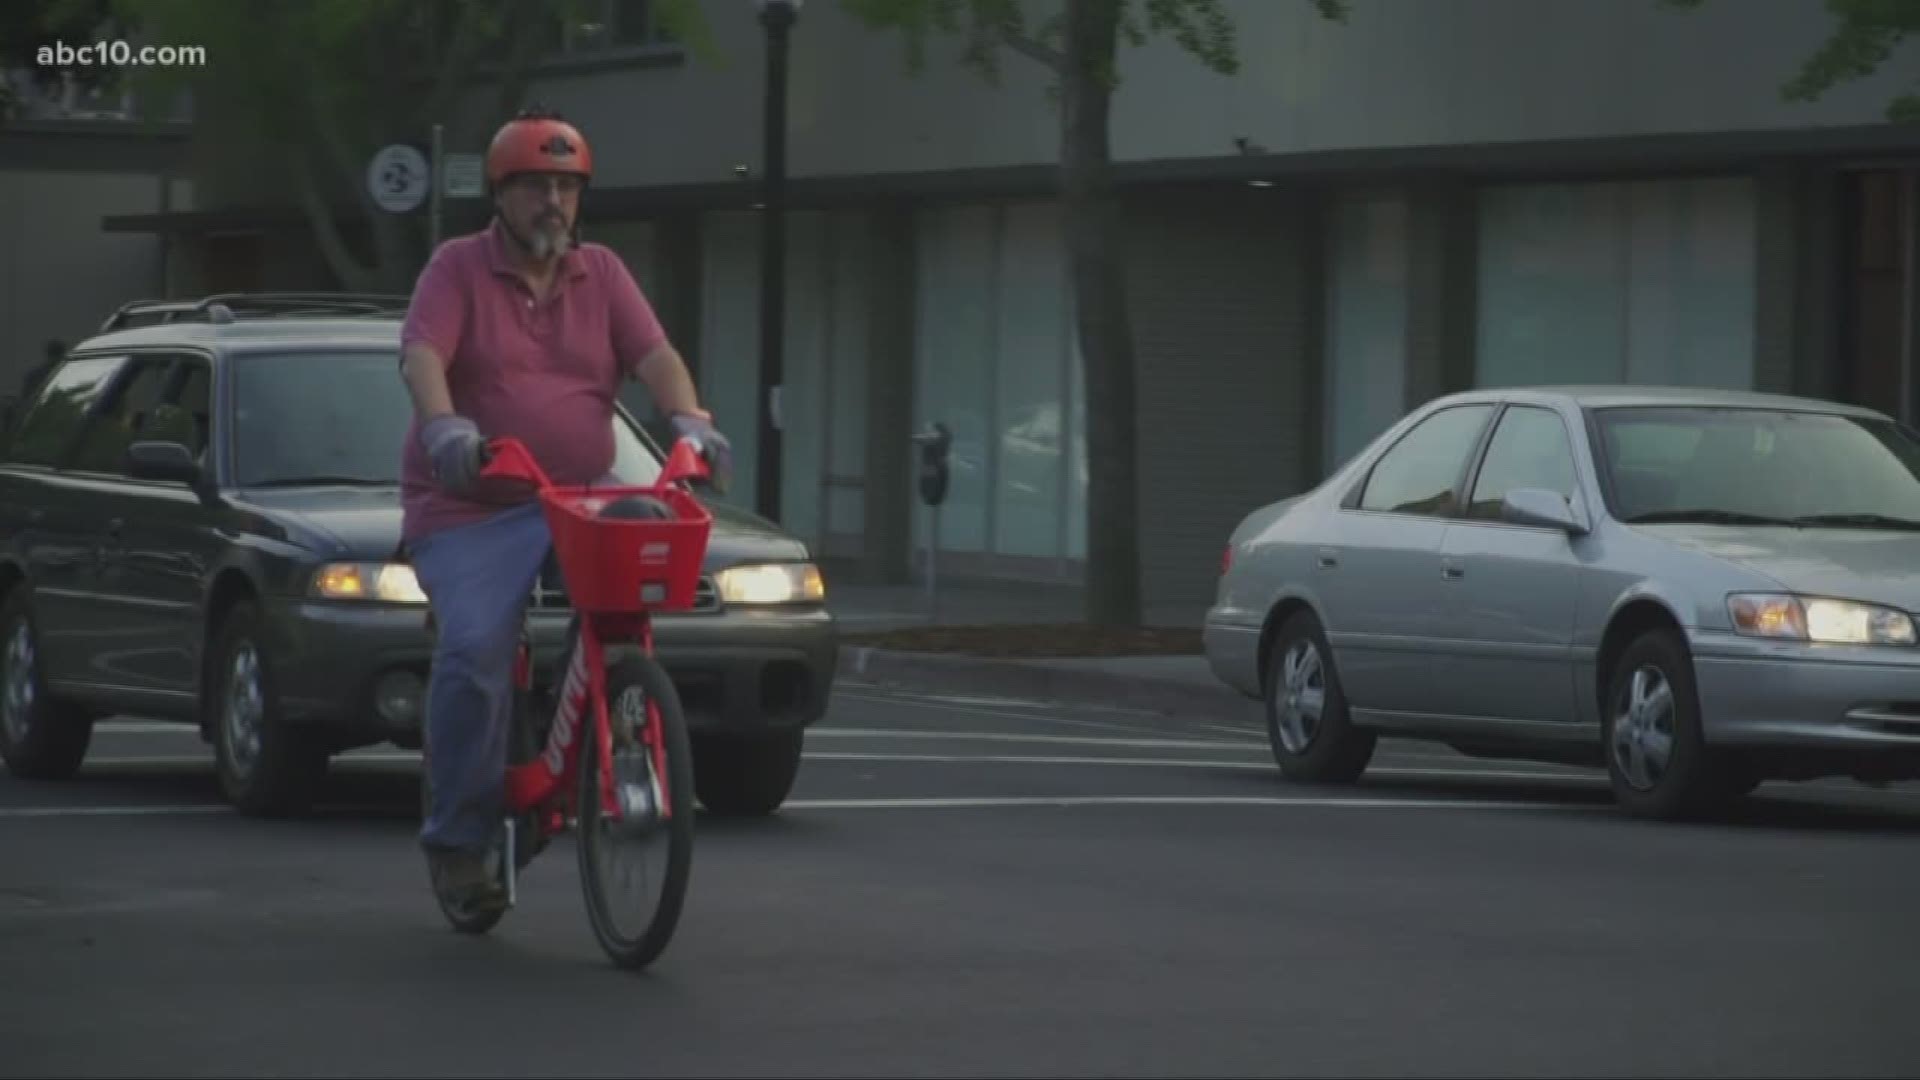 Hundreds of JUMP bikes are on the streets of Sacramento, but do riders know the rules of the rules of the road?